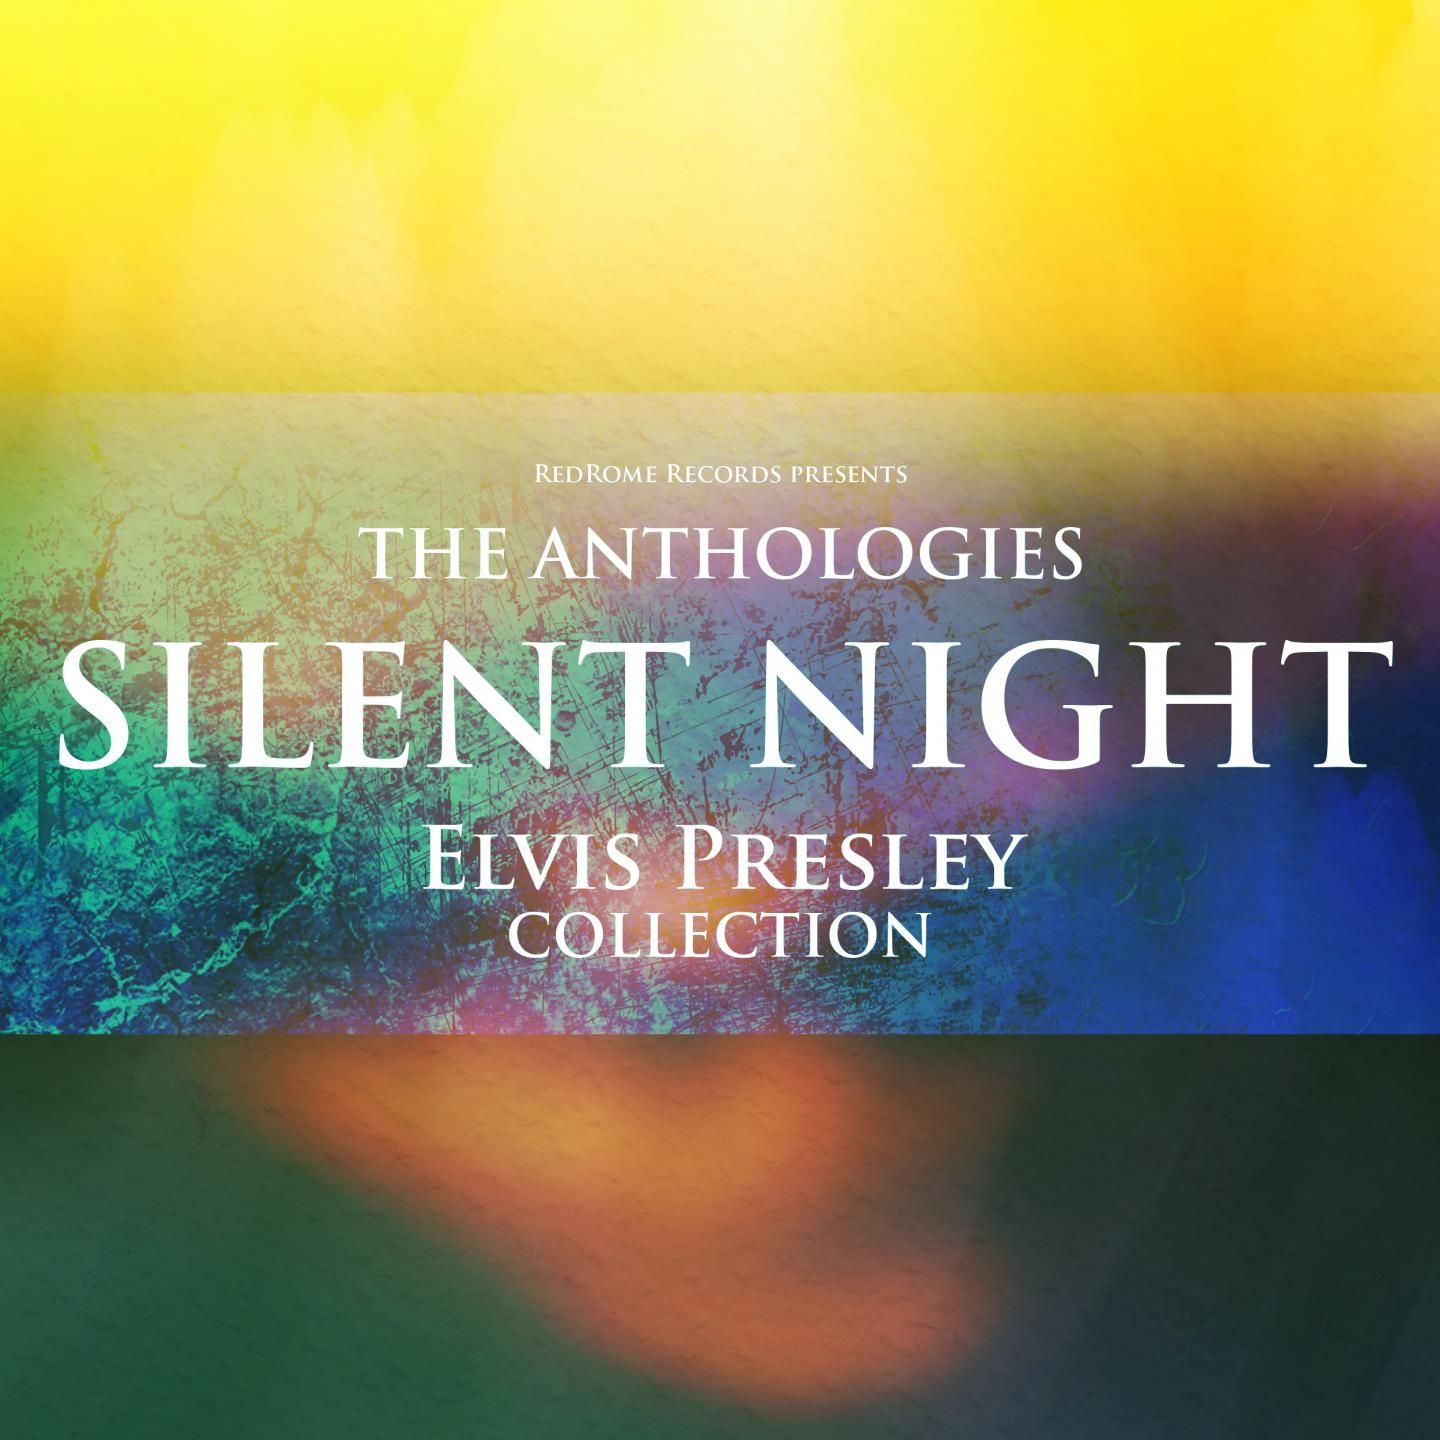 The Anthologies: Silent Night (Elvis Presley Collection)